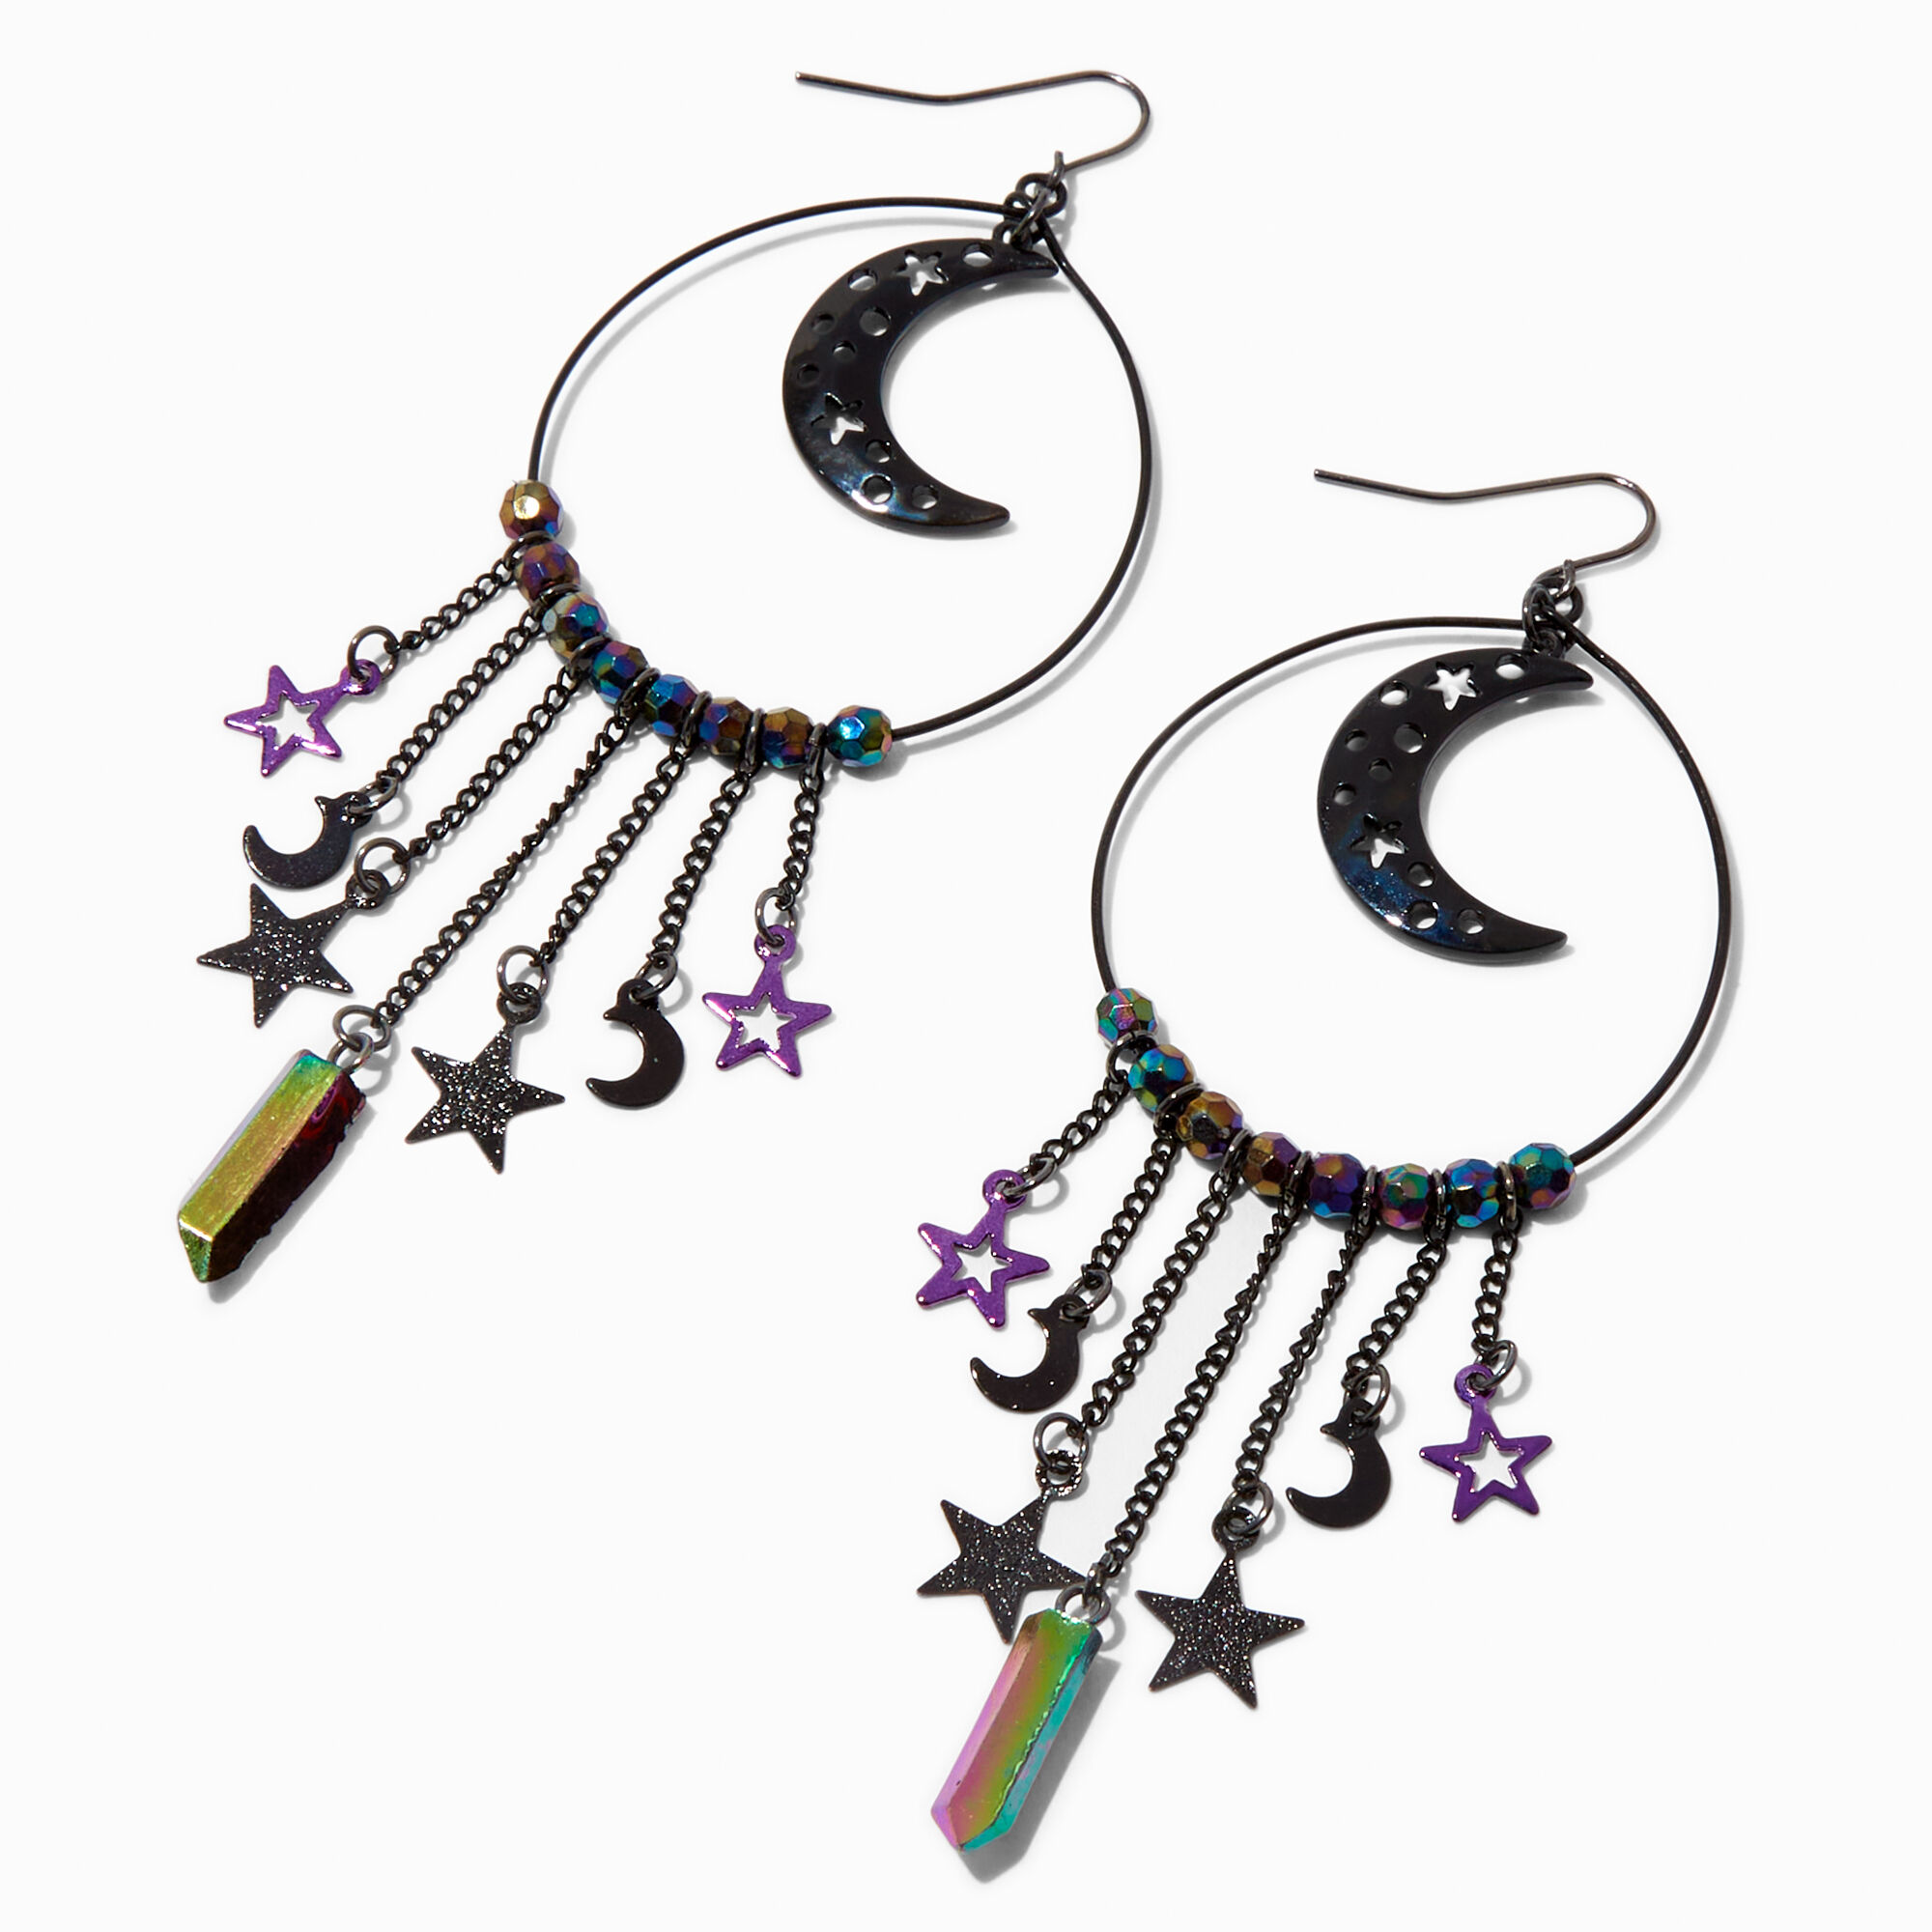 View Claires Crescent Moon Chain Fringe 4 Drop Earrings information